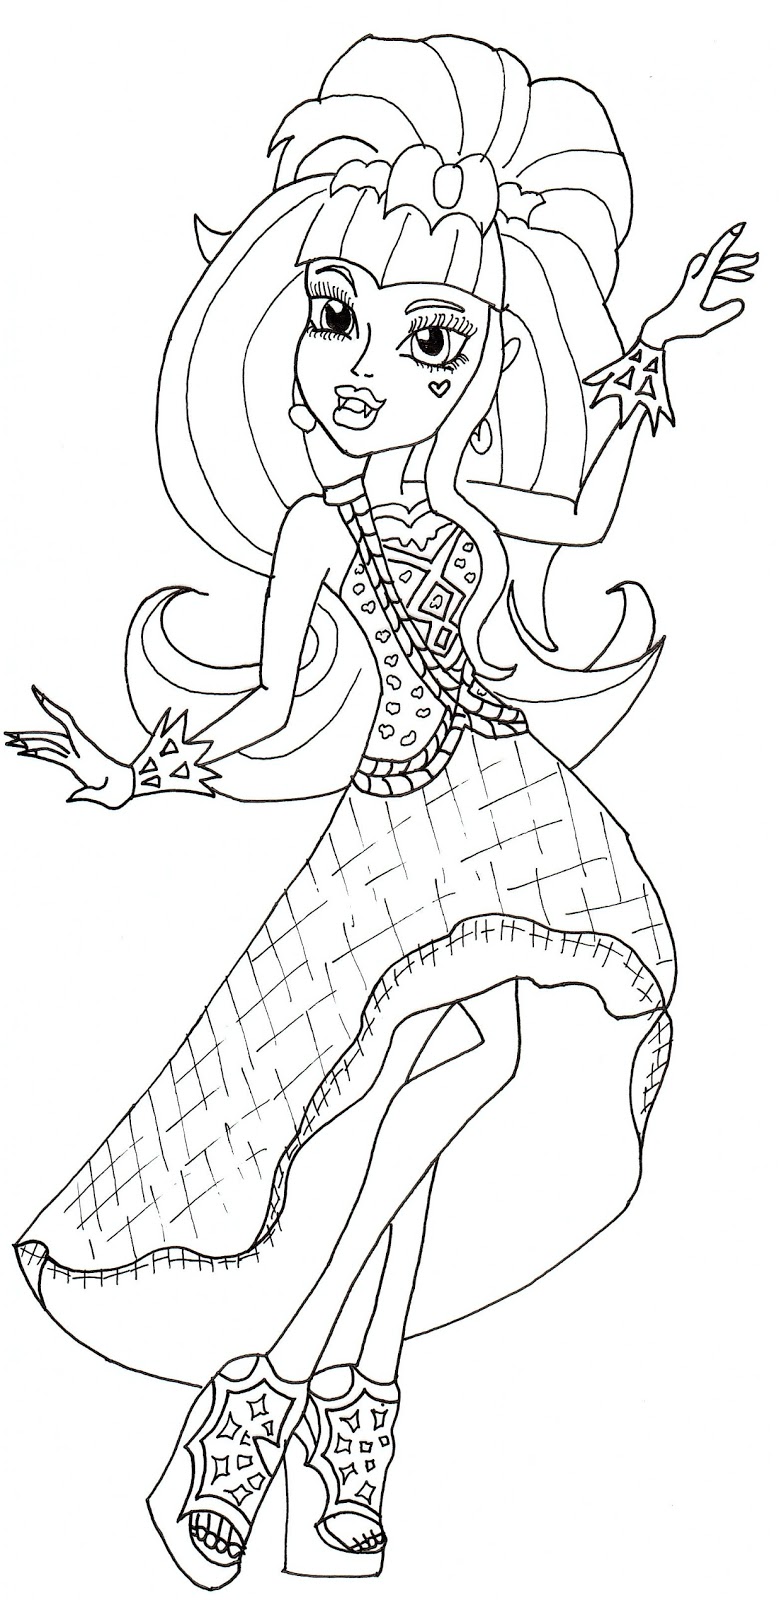 Download Free Printable Monster High Coloring Pages: Draculaura 13 Wishes Coloring Page